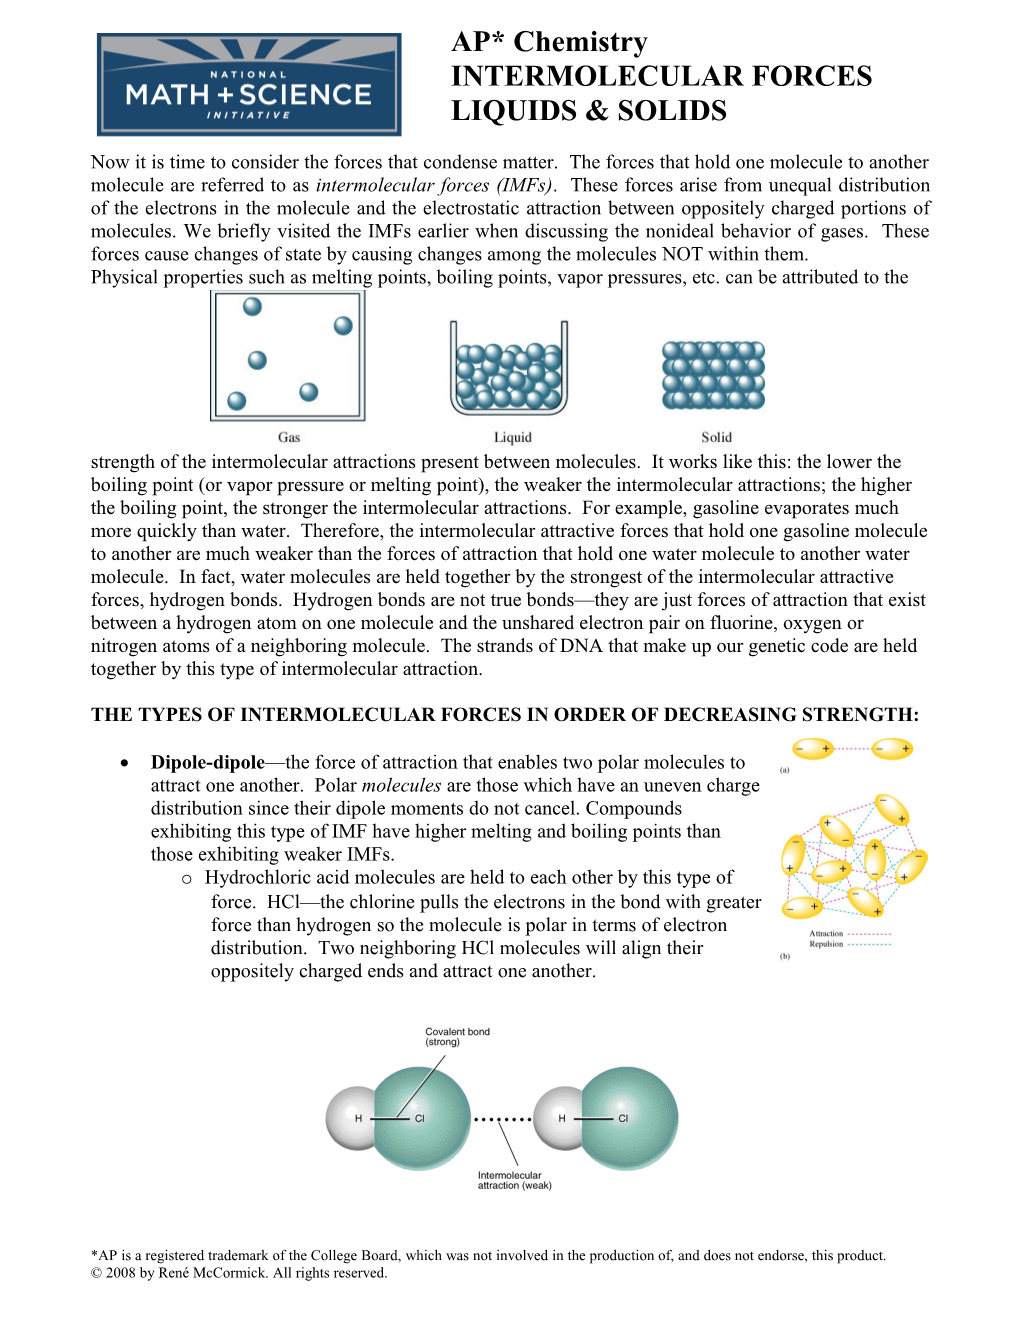 The Types of Intermolecular Forces in Order of Decreasing Strength